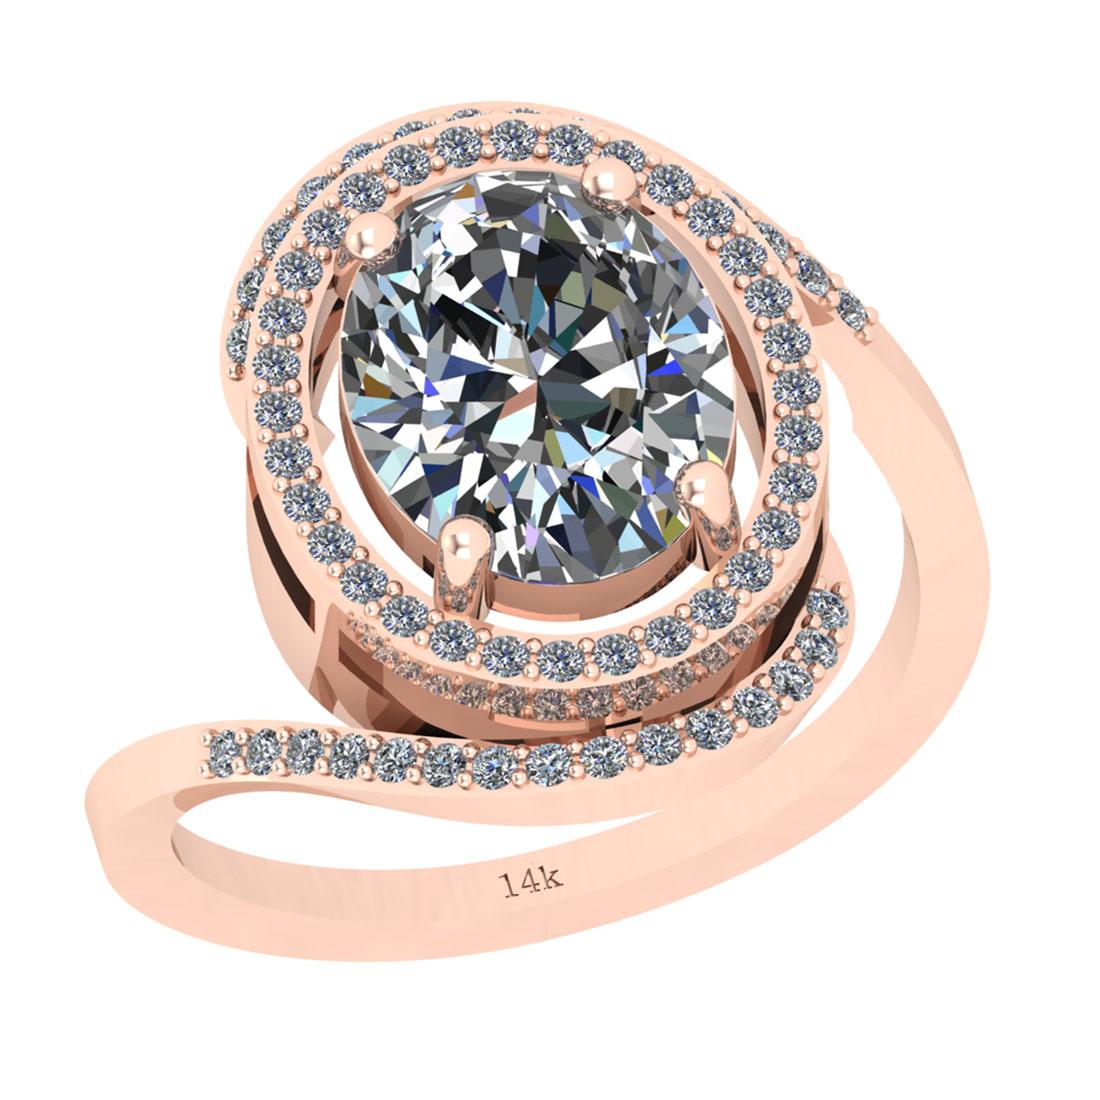 2.82 Ctw SI2/I1 Diamond 14K Rose Gold Engagement Halo Ring (Oval Cut Center Stone Certified By GIA )